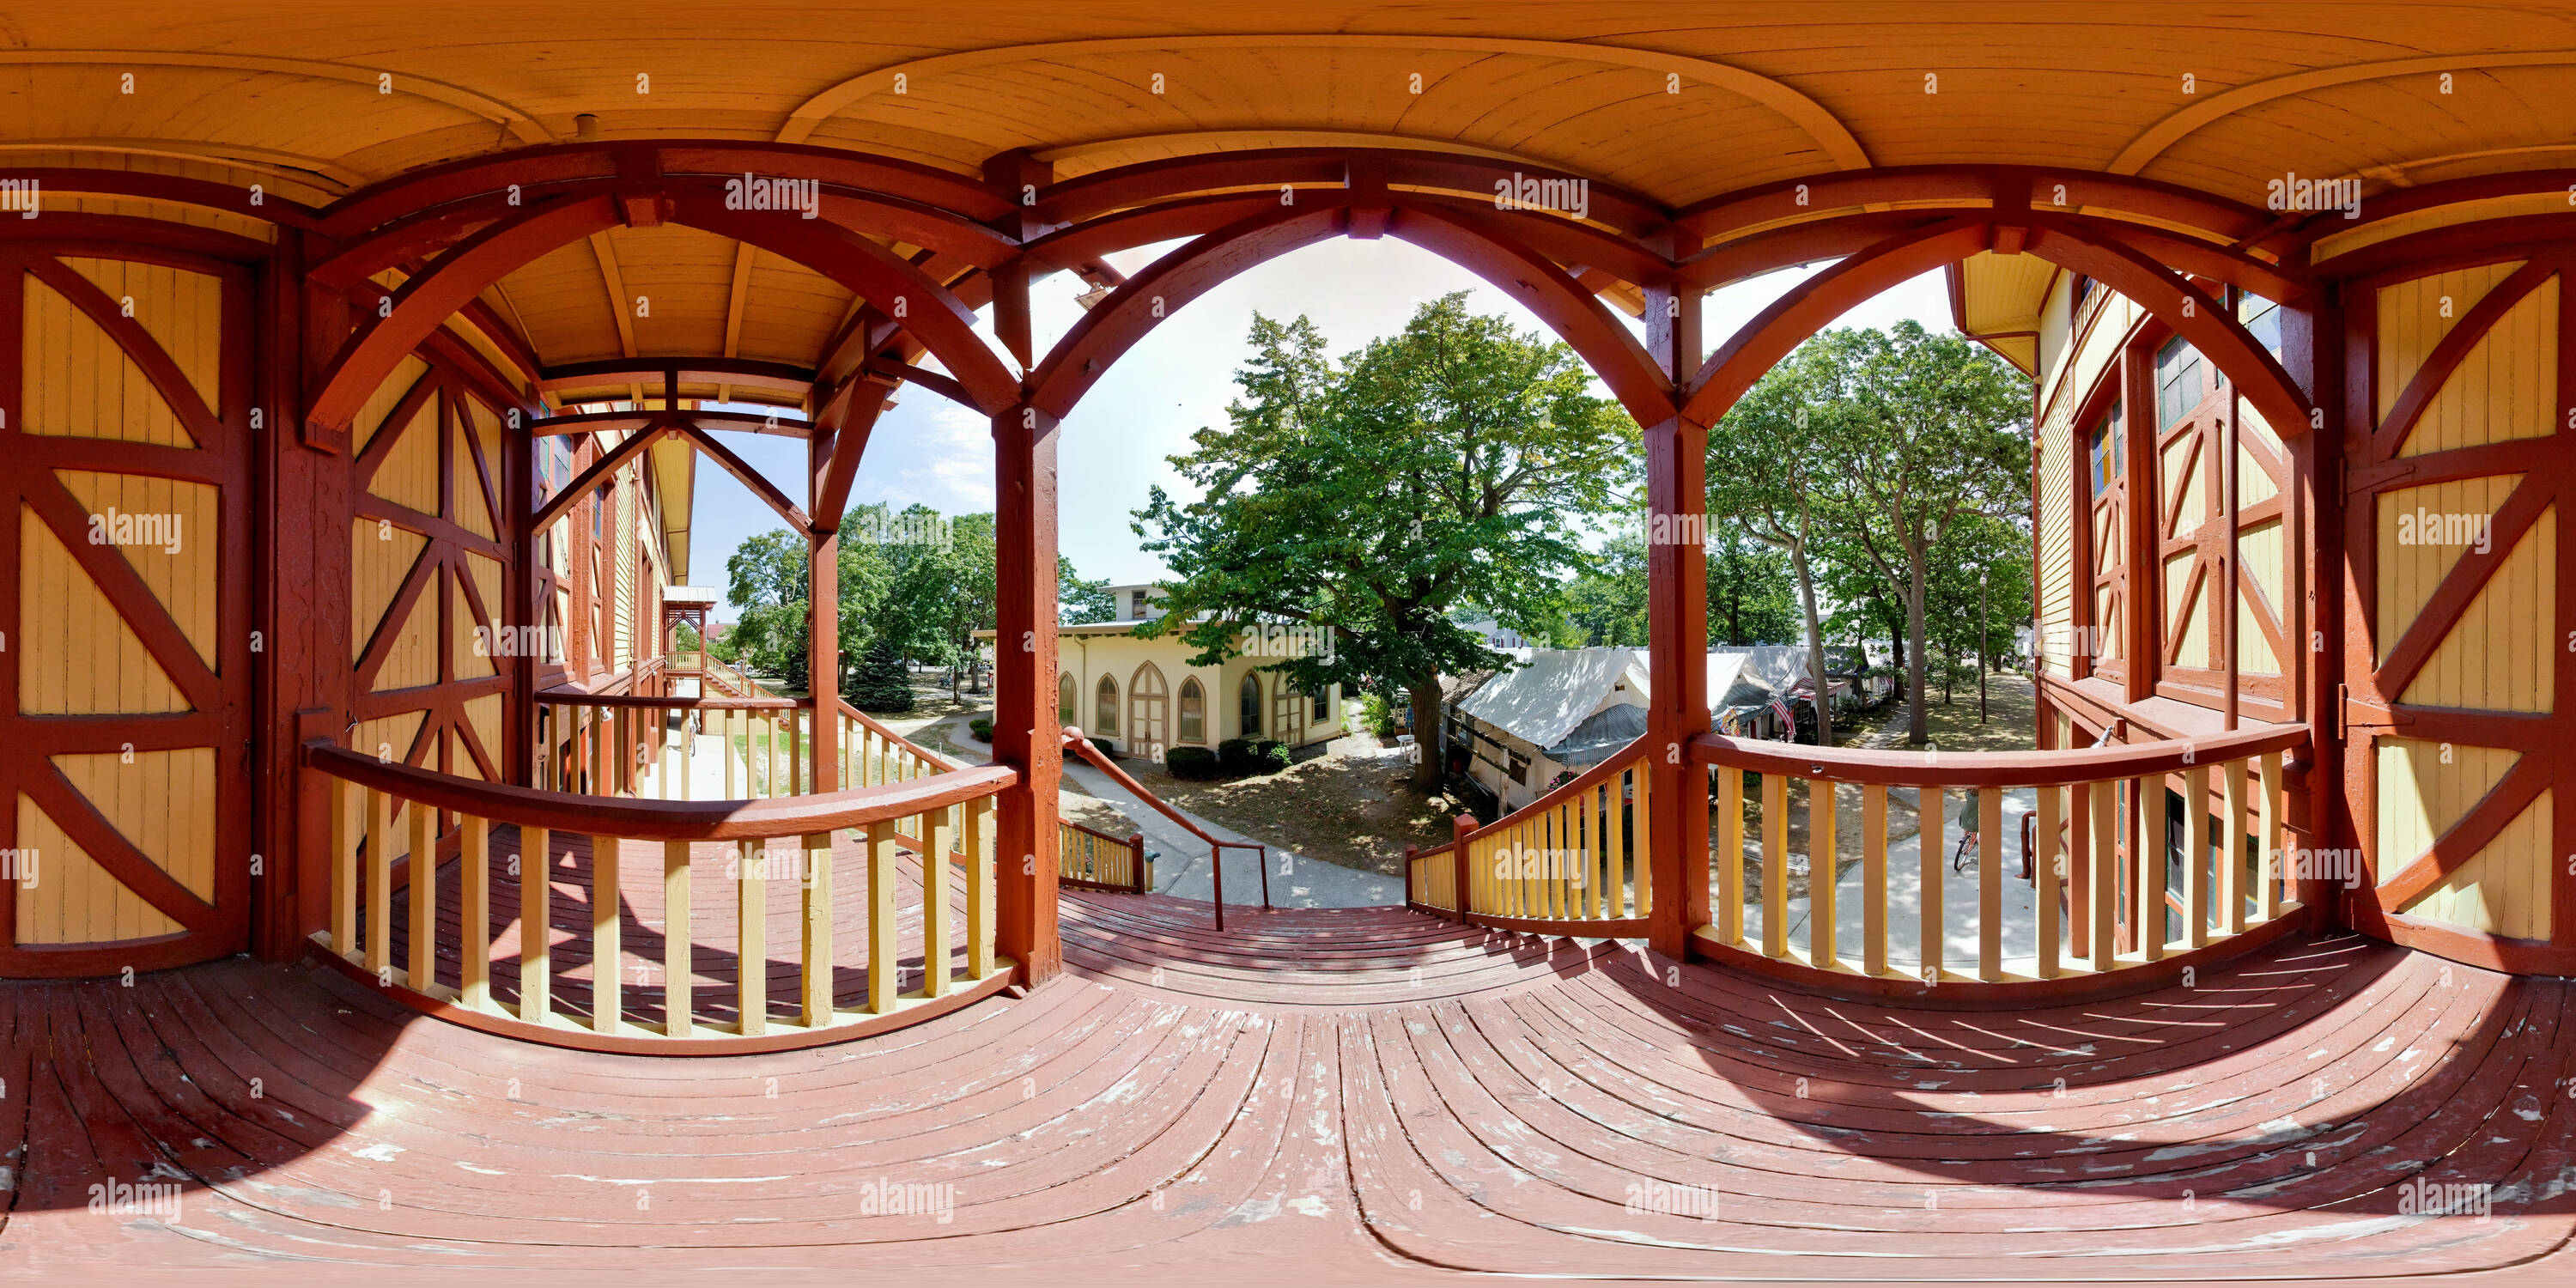 360 degree panoramic view of The Auditorium & Tent Colony, Ocean Grove, New Jersey